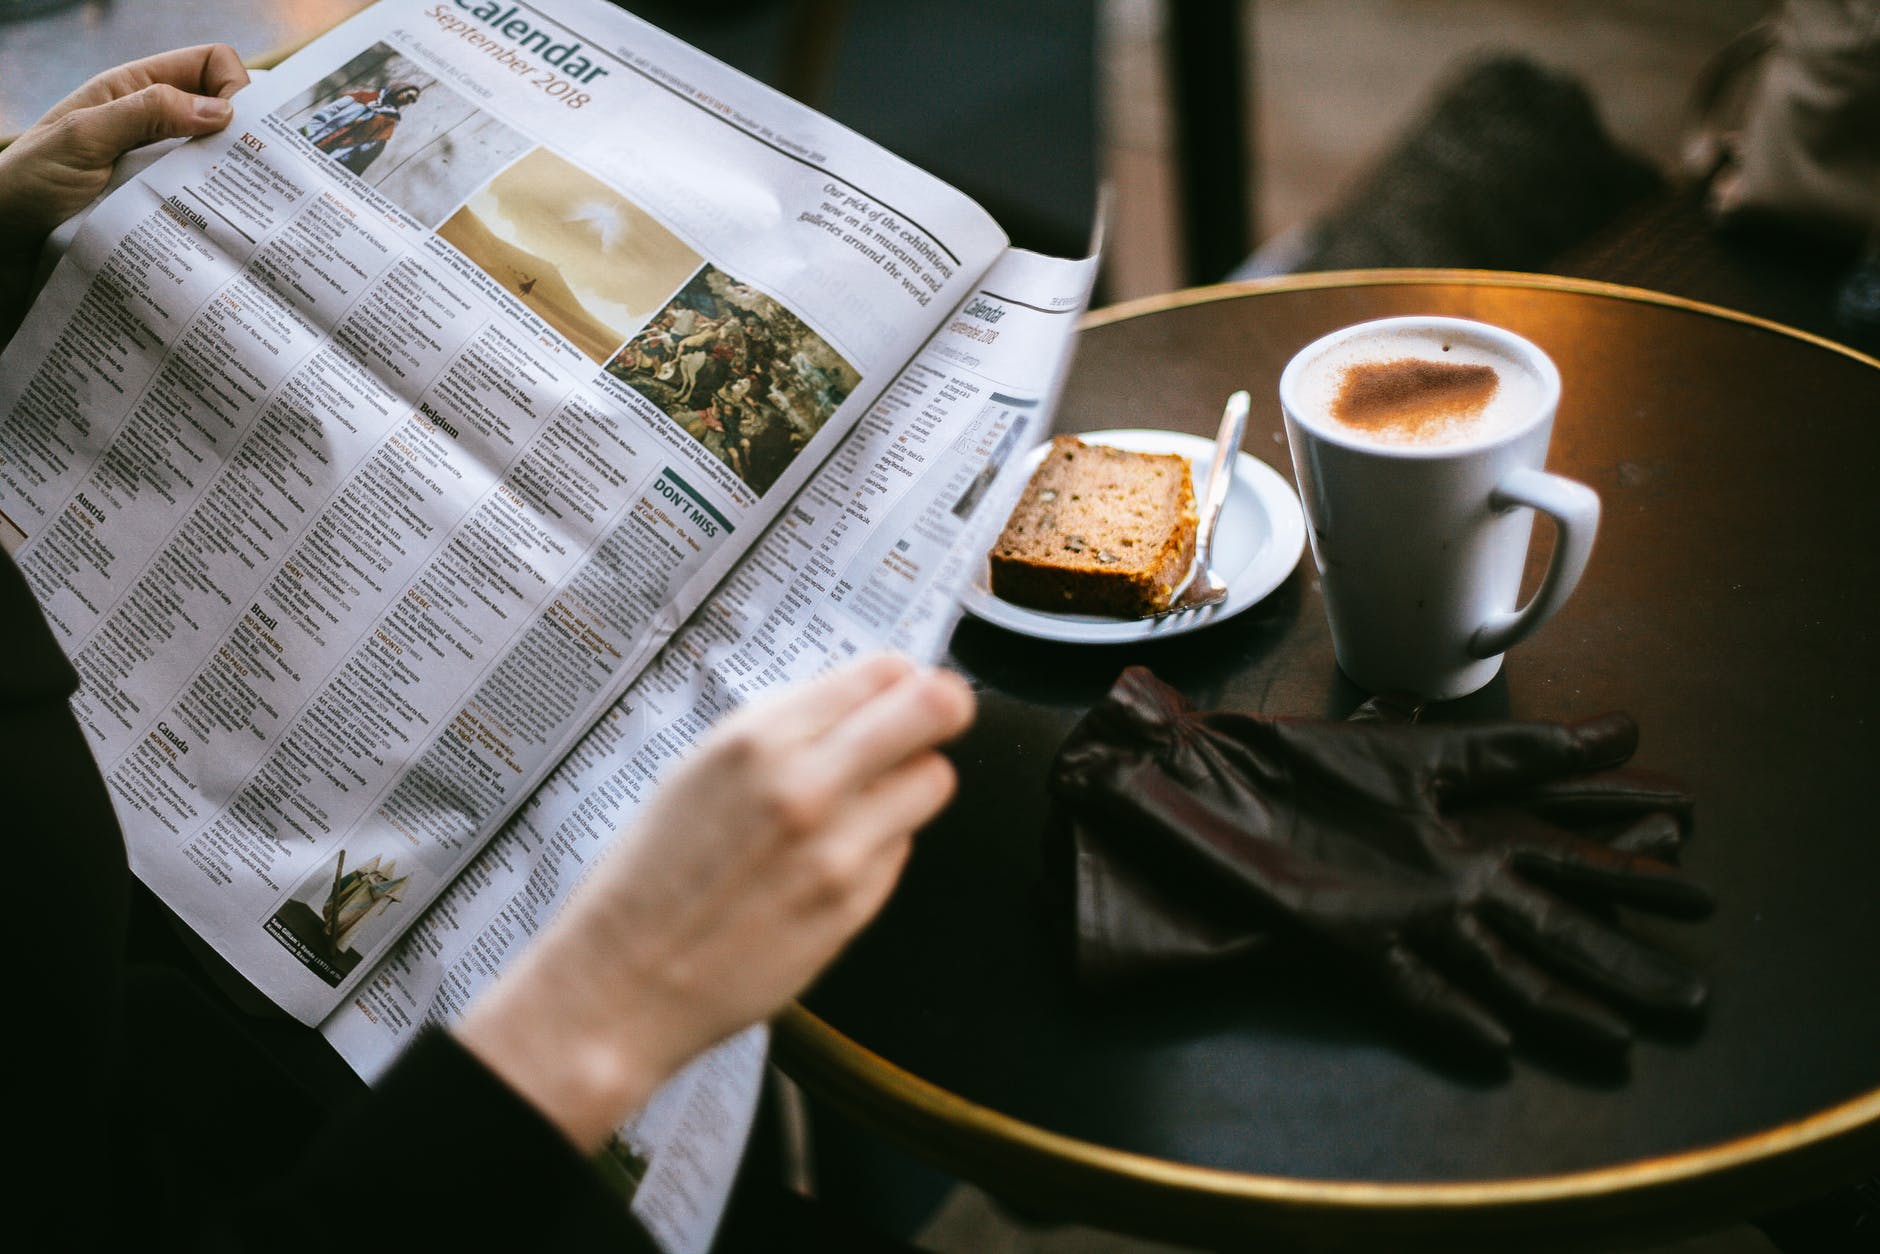 Morning papers | Source: Pexels